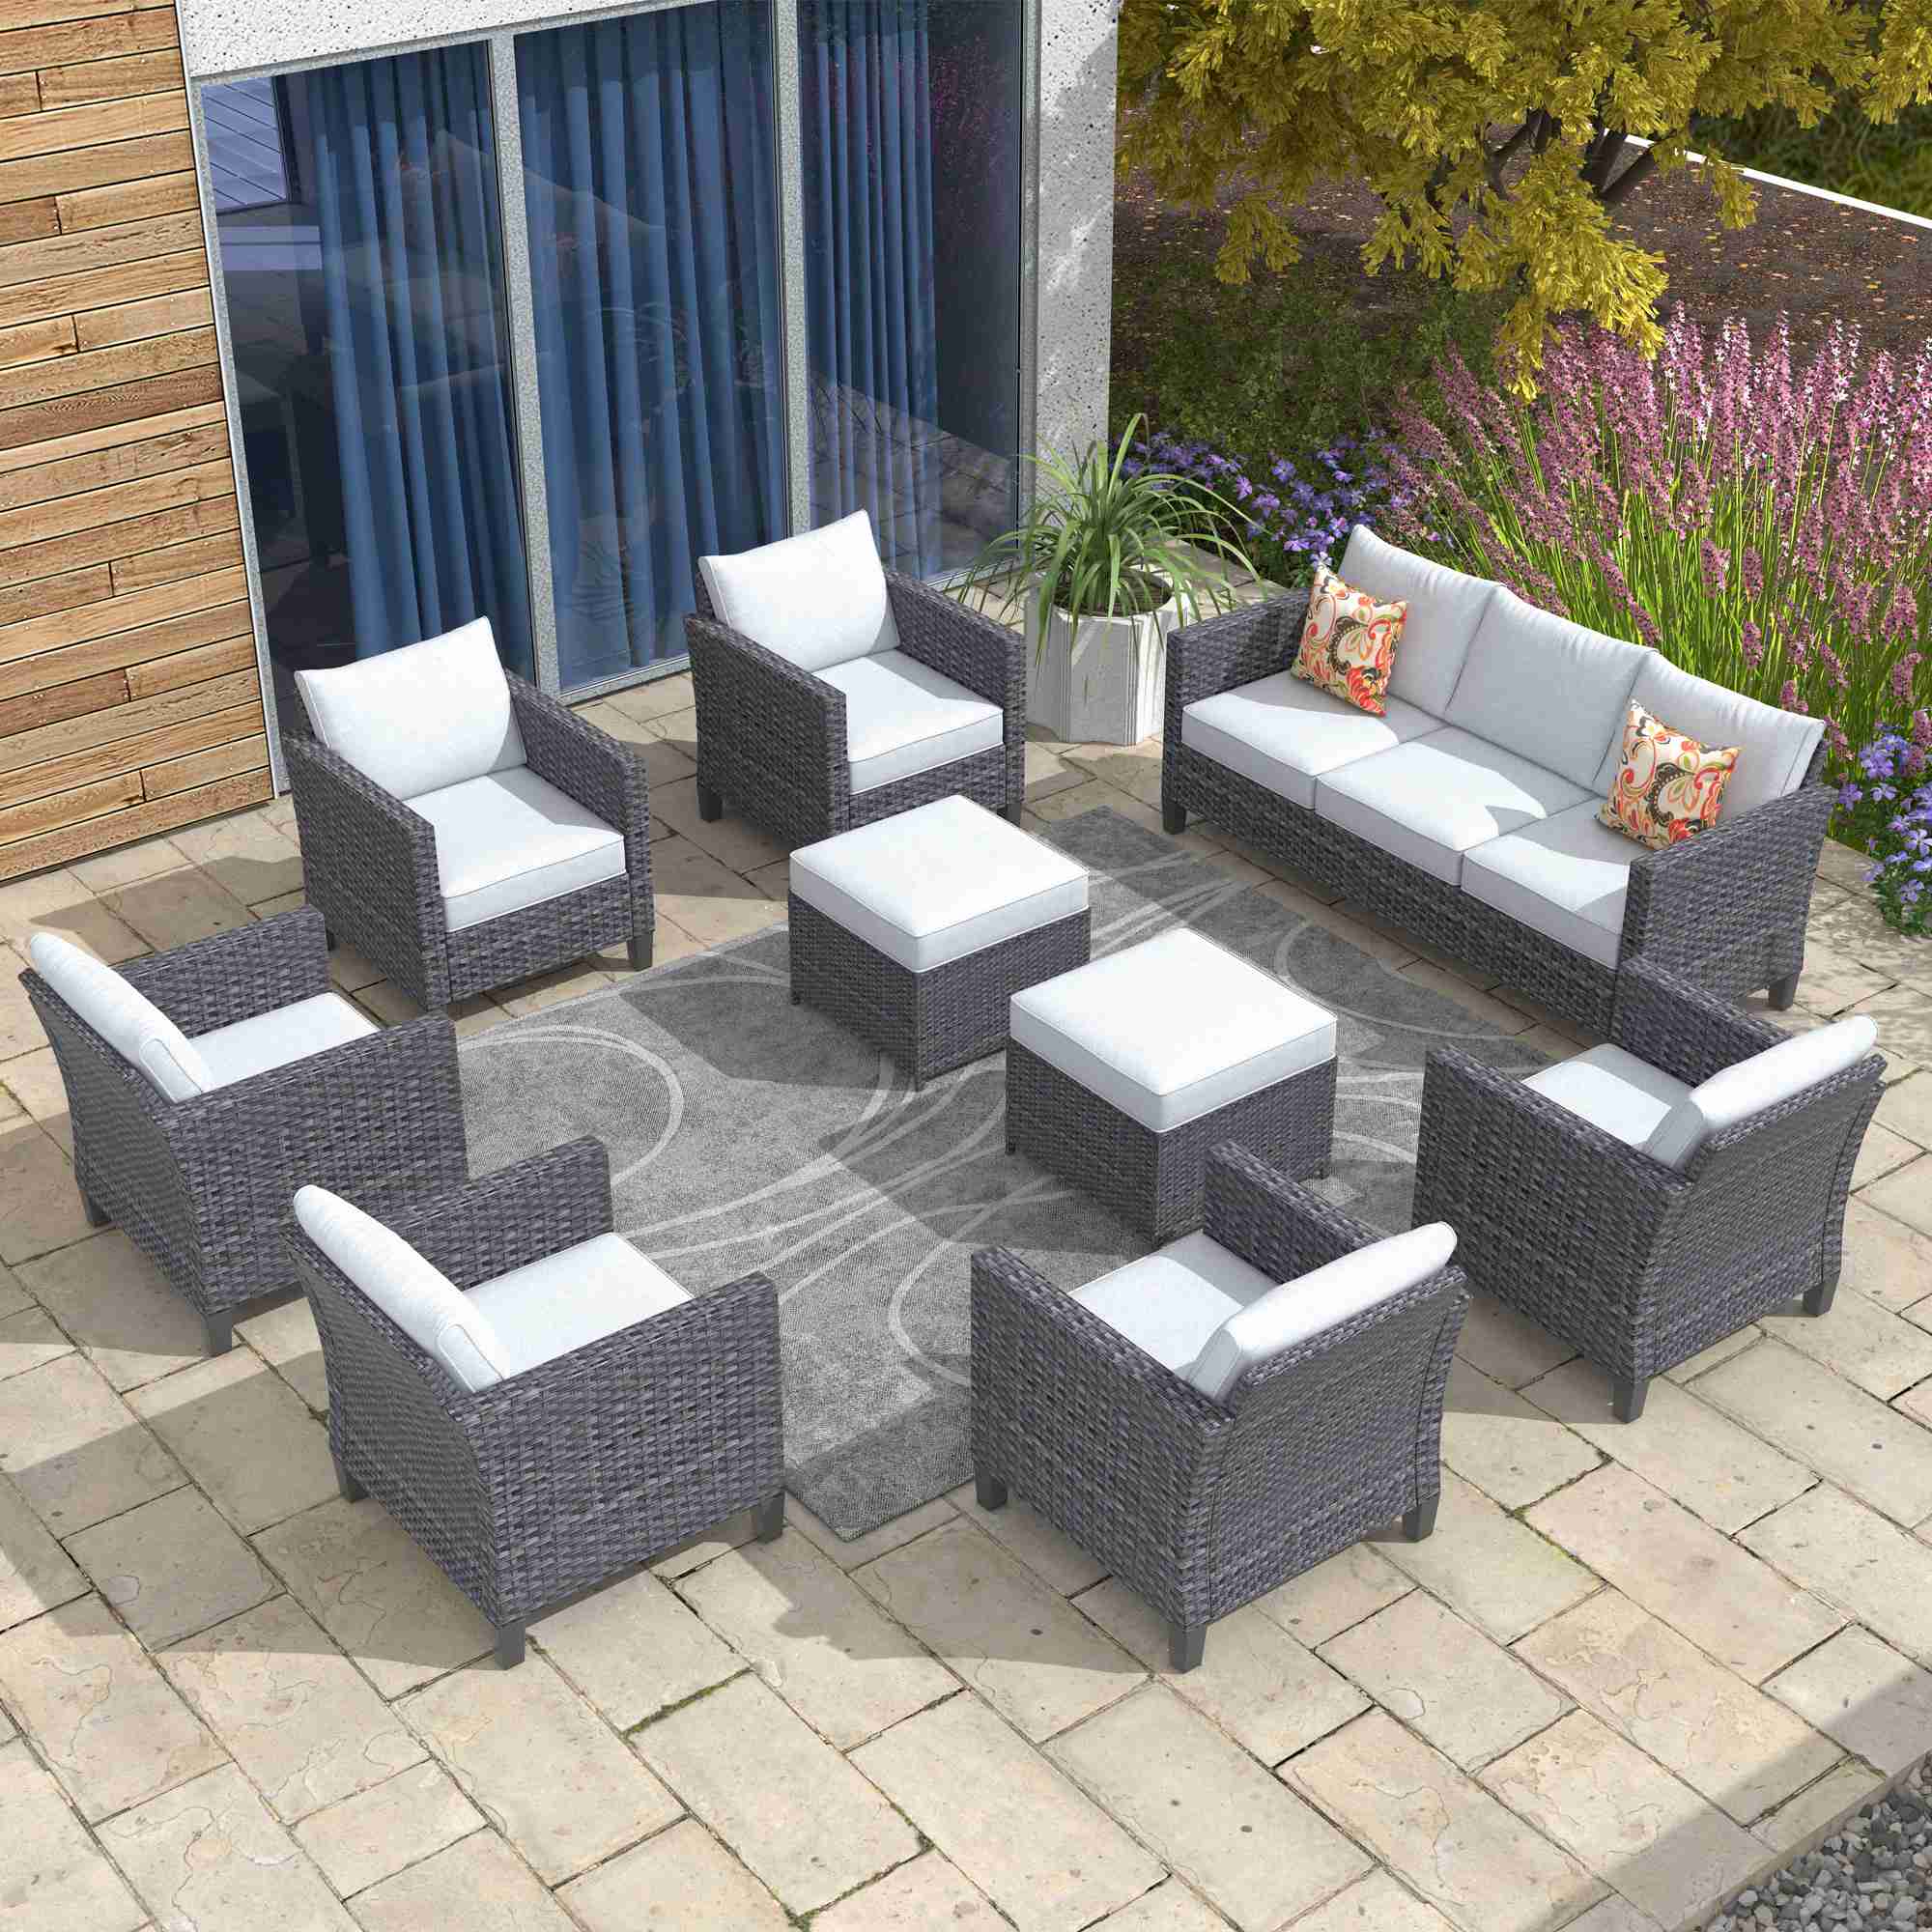 Ovios Patio Conversation Set New Vultros 9-Piece High Back with Cushions